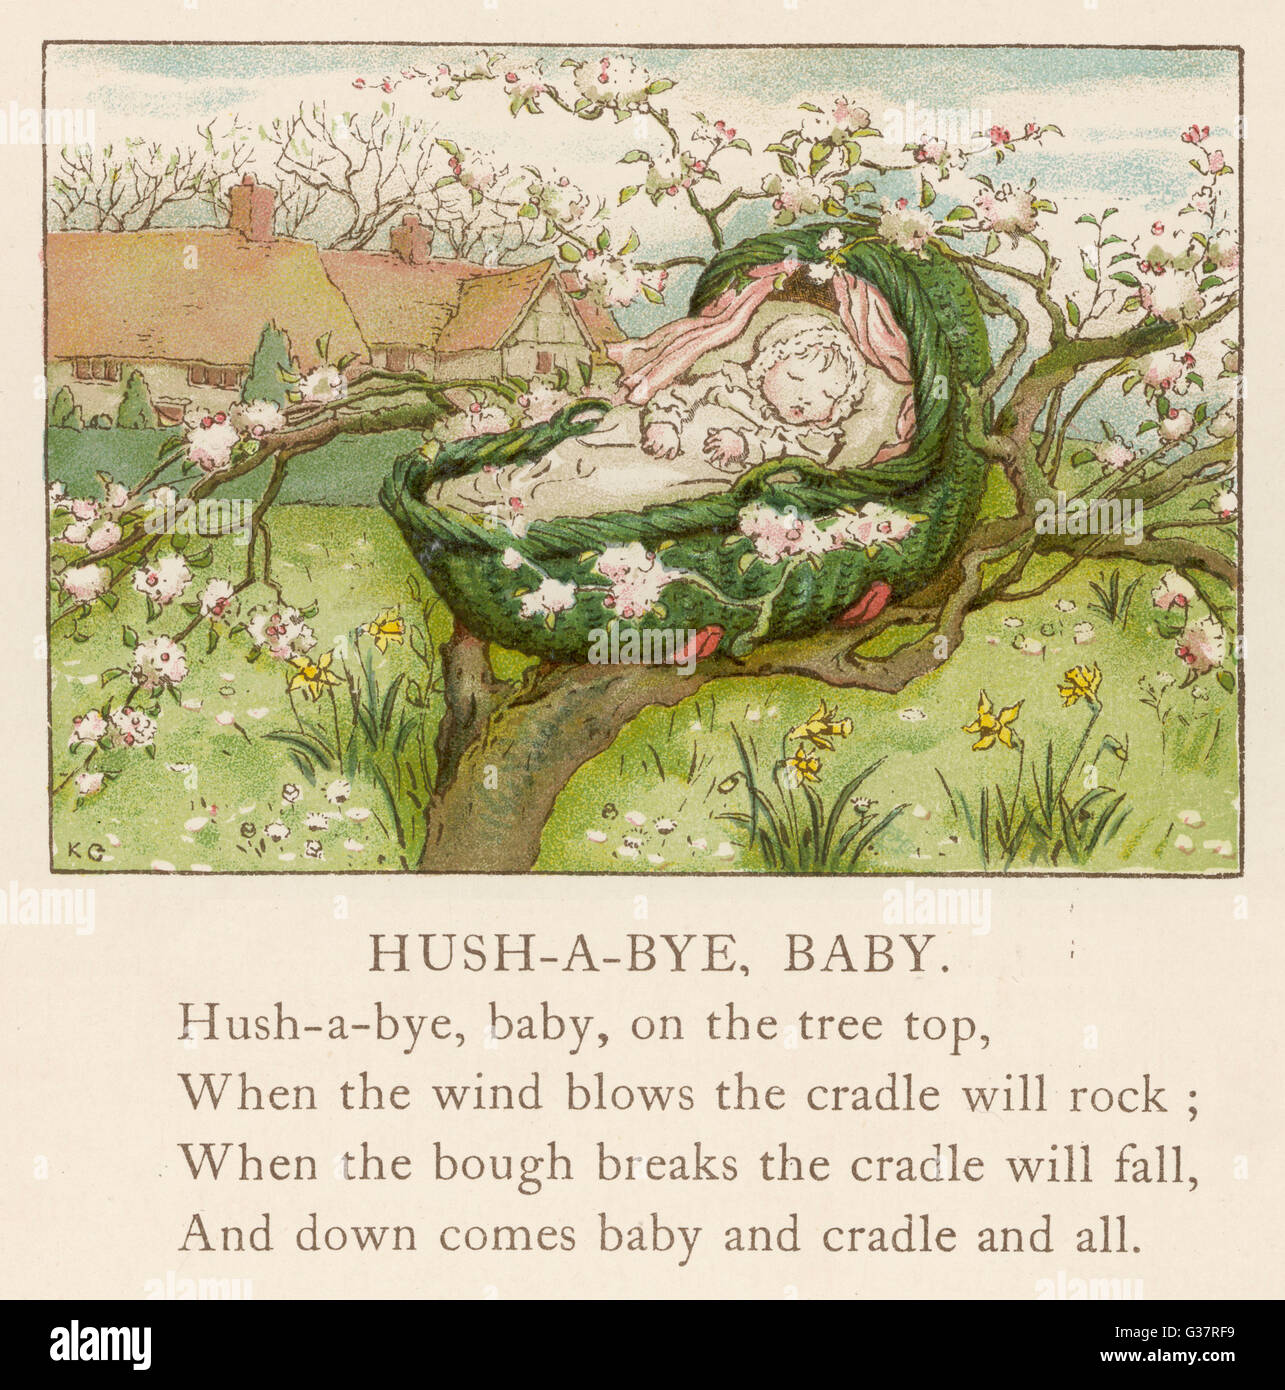 A baby sleeps in its cradle  among the apple blossom,  unaware of the danger that at  any moment the bough may  break, in which case down will  go cradle and baby and all.     Date: 1900 Stock Photo